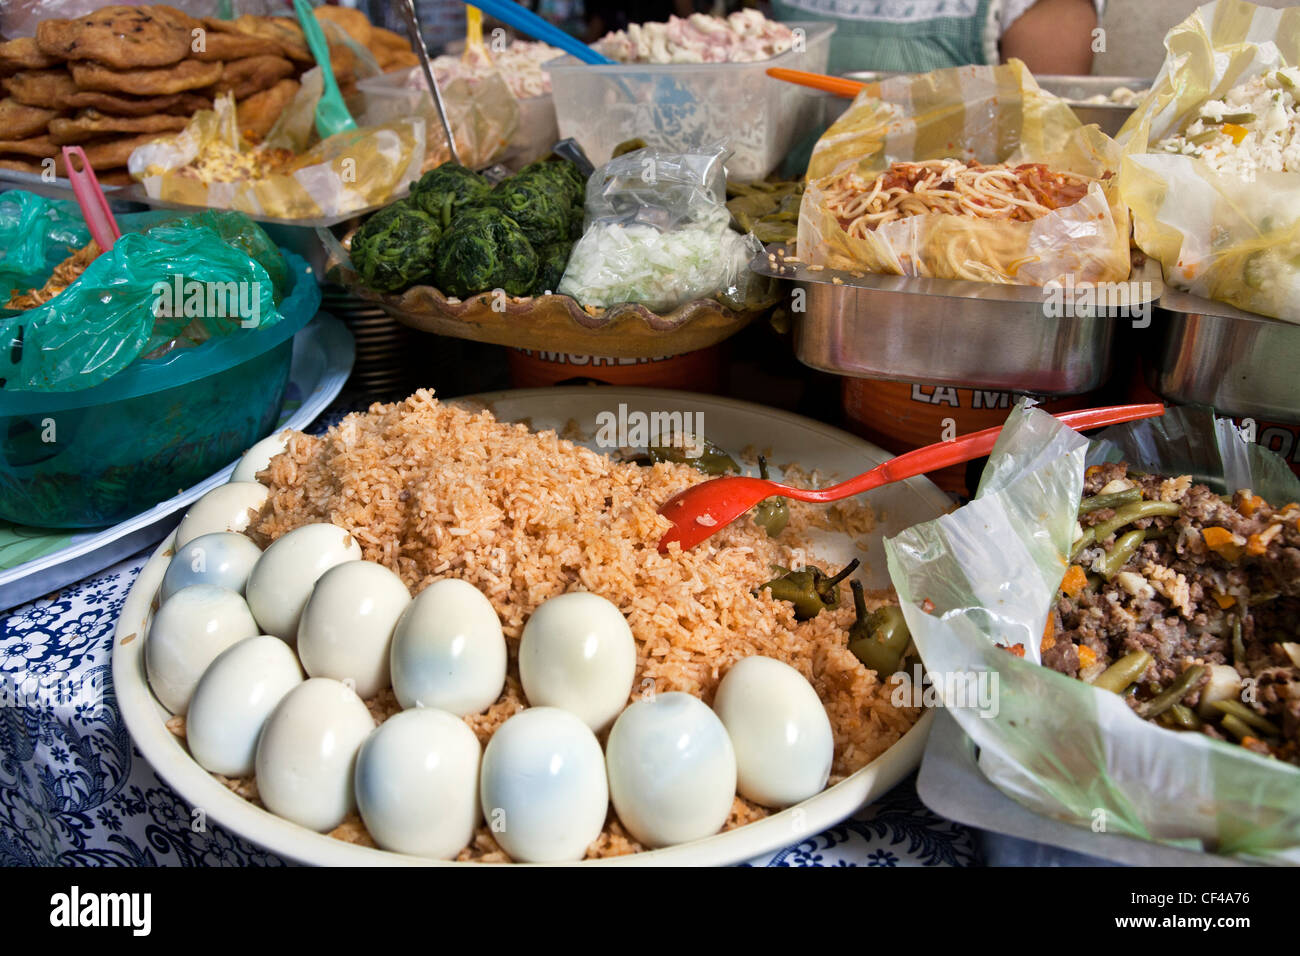 tempting array of wholesome healthy nourishing deli style prepared foods displayed on counter in Benito Juarez market Oaxaca Stock Photo